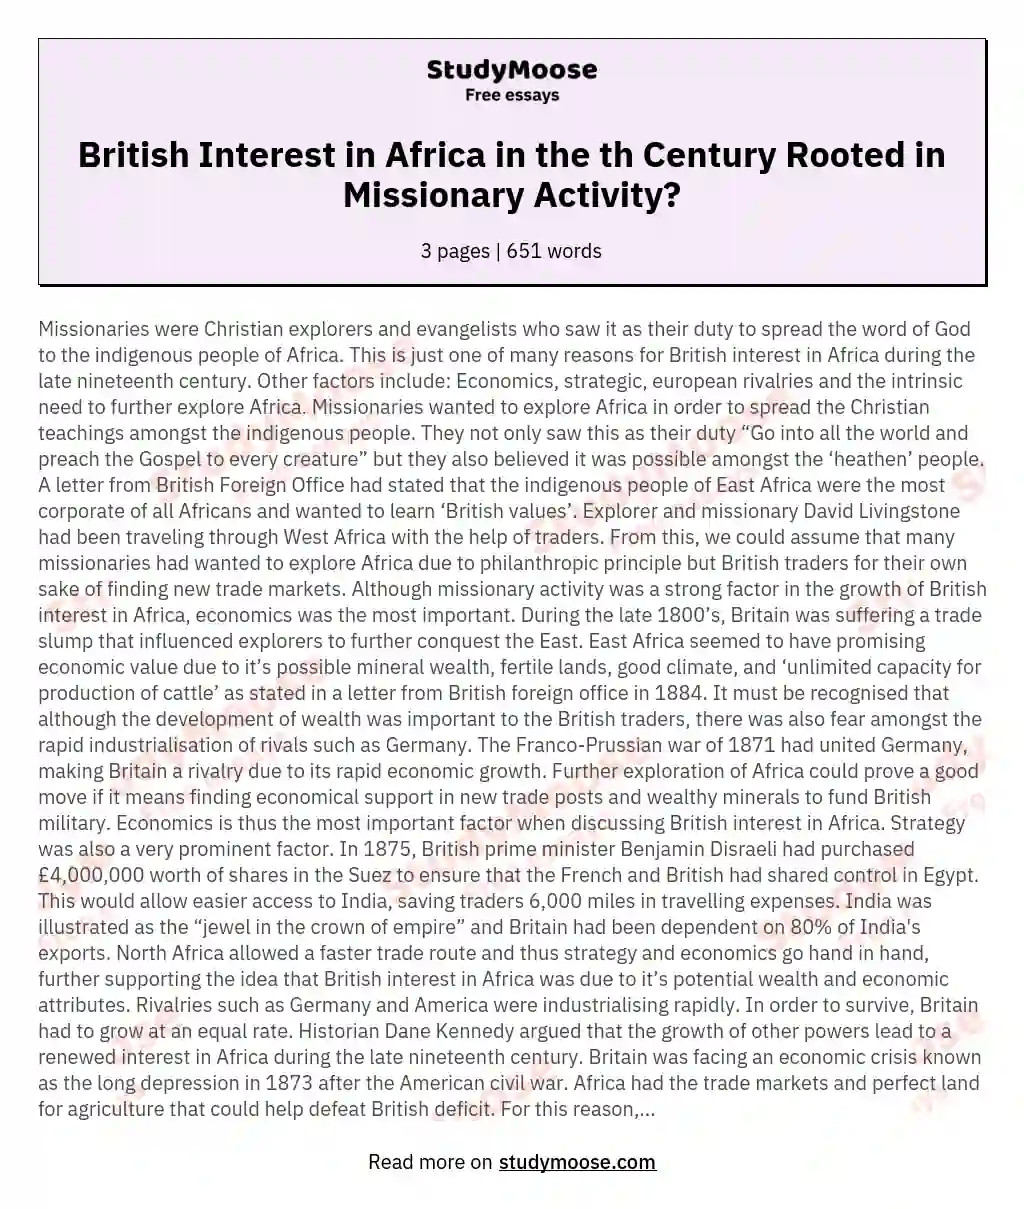 British Interest in Africa in the th Century Rooted in Missionary Activity?